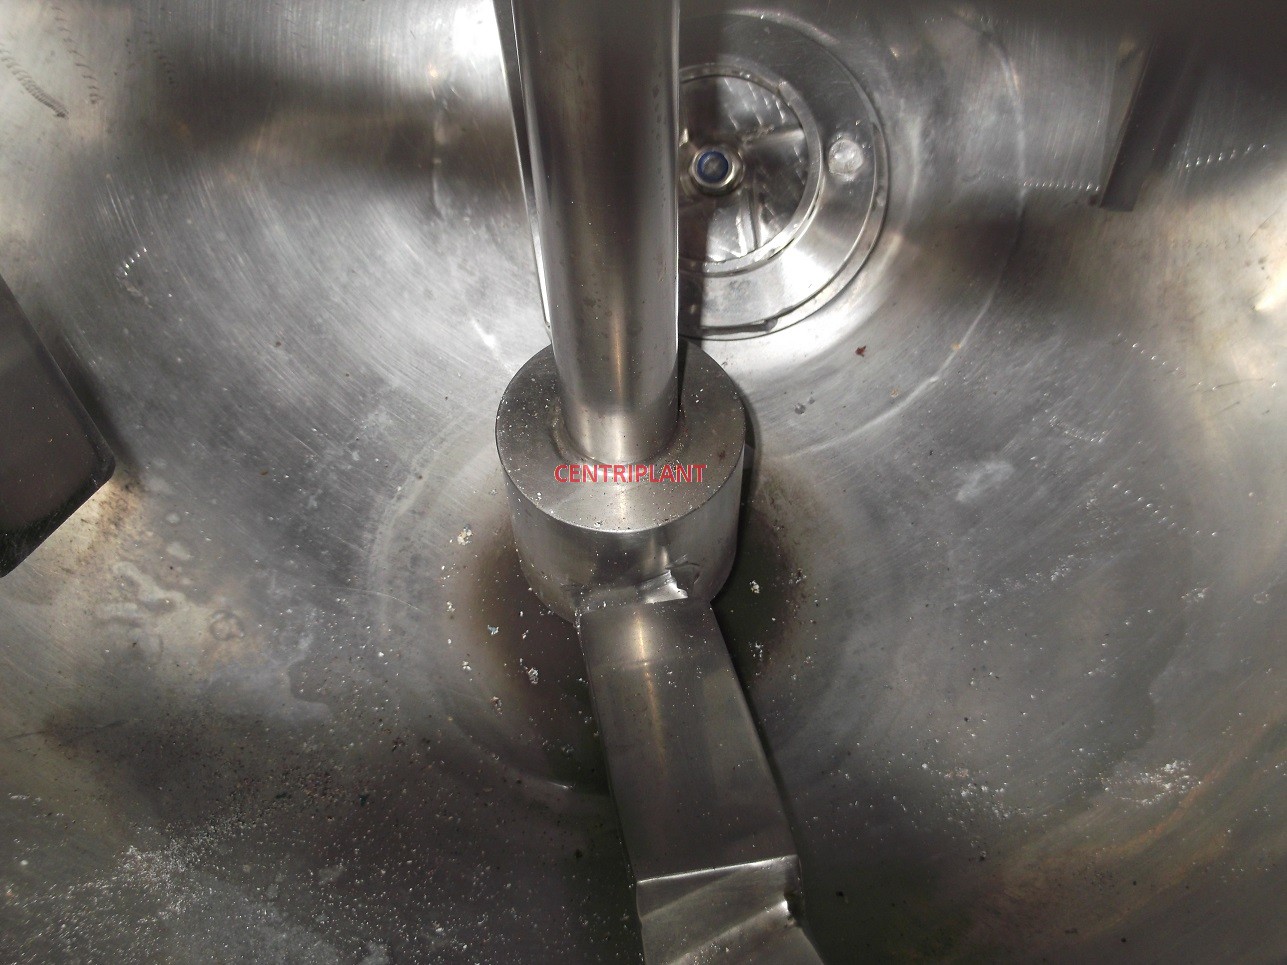 13689 - 80 LITRE STAINLESS STEEL SIDE SCRAPE  WITH HIGH SHEAR BOTTOM ENY MIXER AND TIPPING PAN.